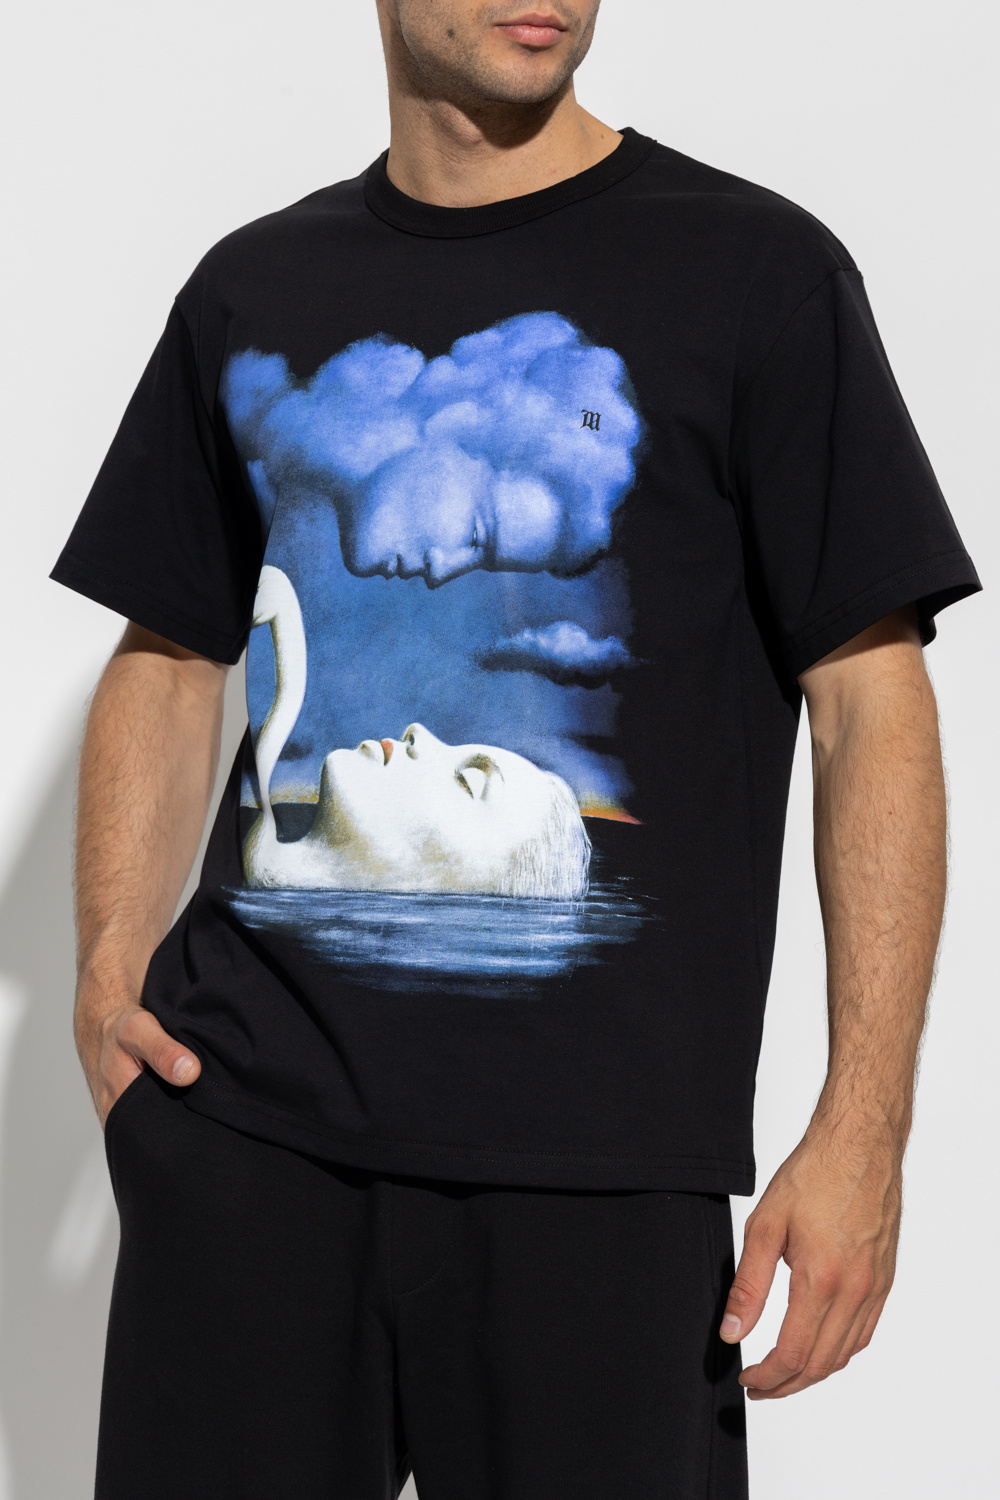 MISBHV ‘The Lady of the Lake’ T-shirt